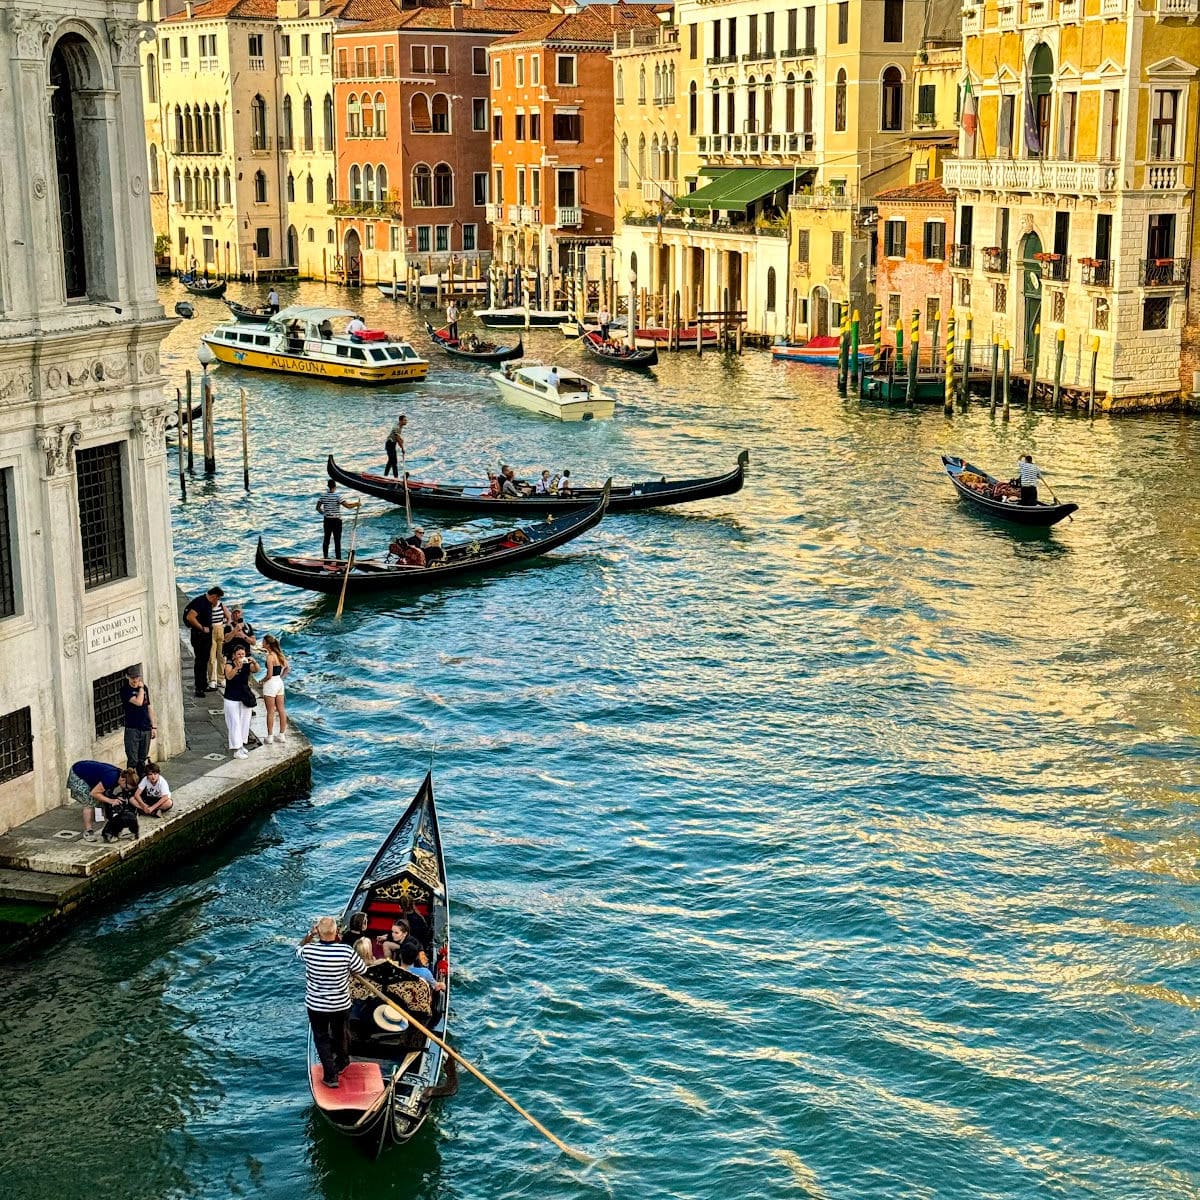 16 Things to Do in Venice Italy in One Day